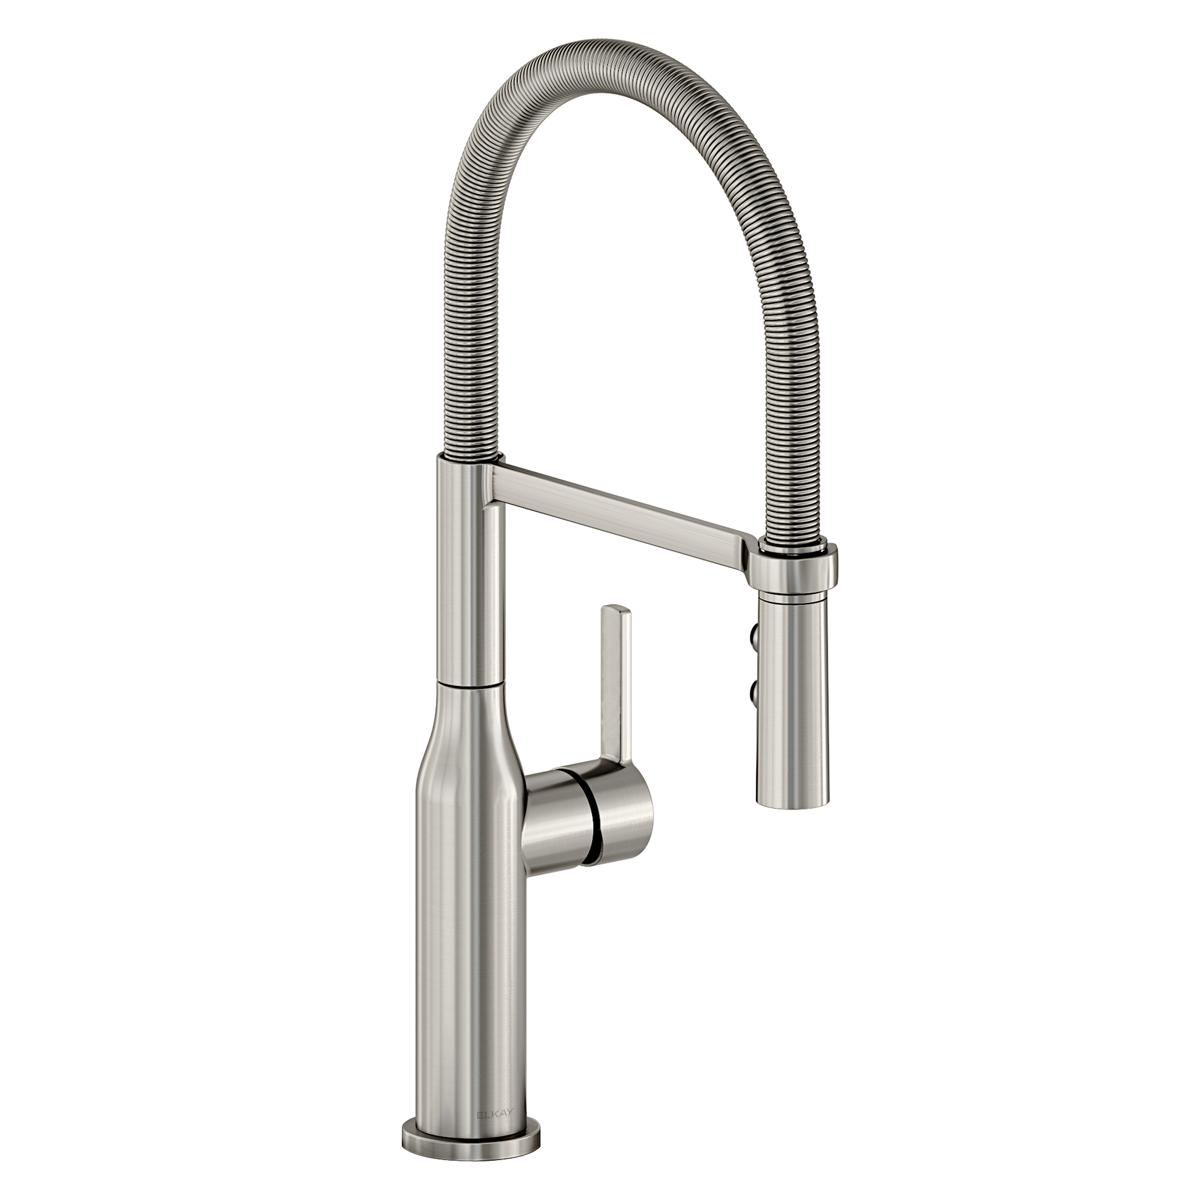 Elkay Avado Single Hole Kitchen Faucet with Semi-professional Spout and Forward Only Lever Handle